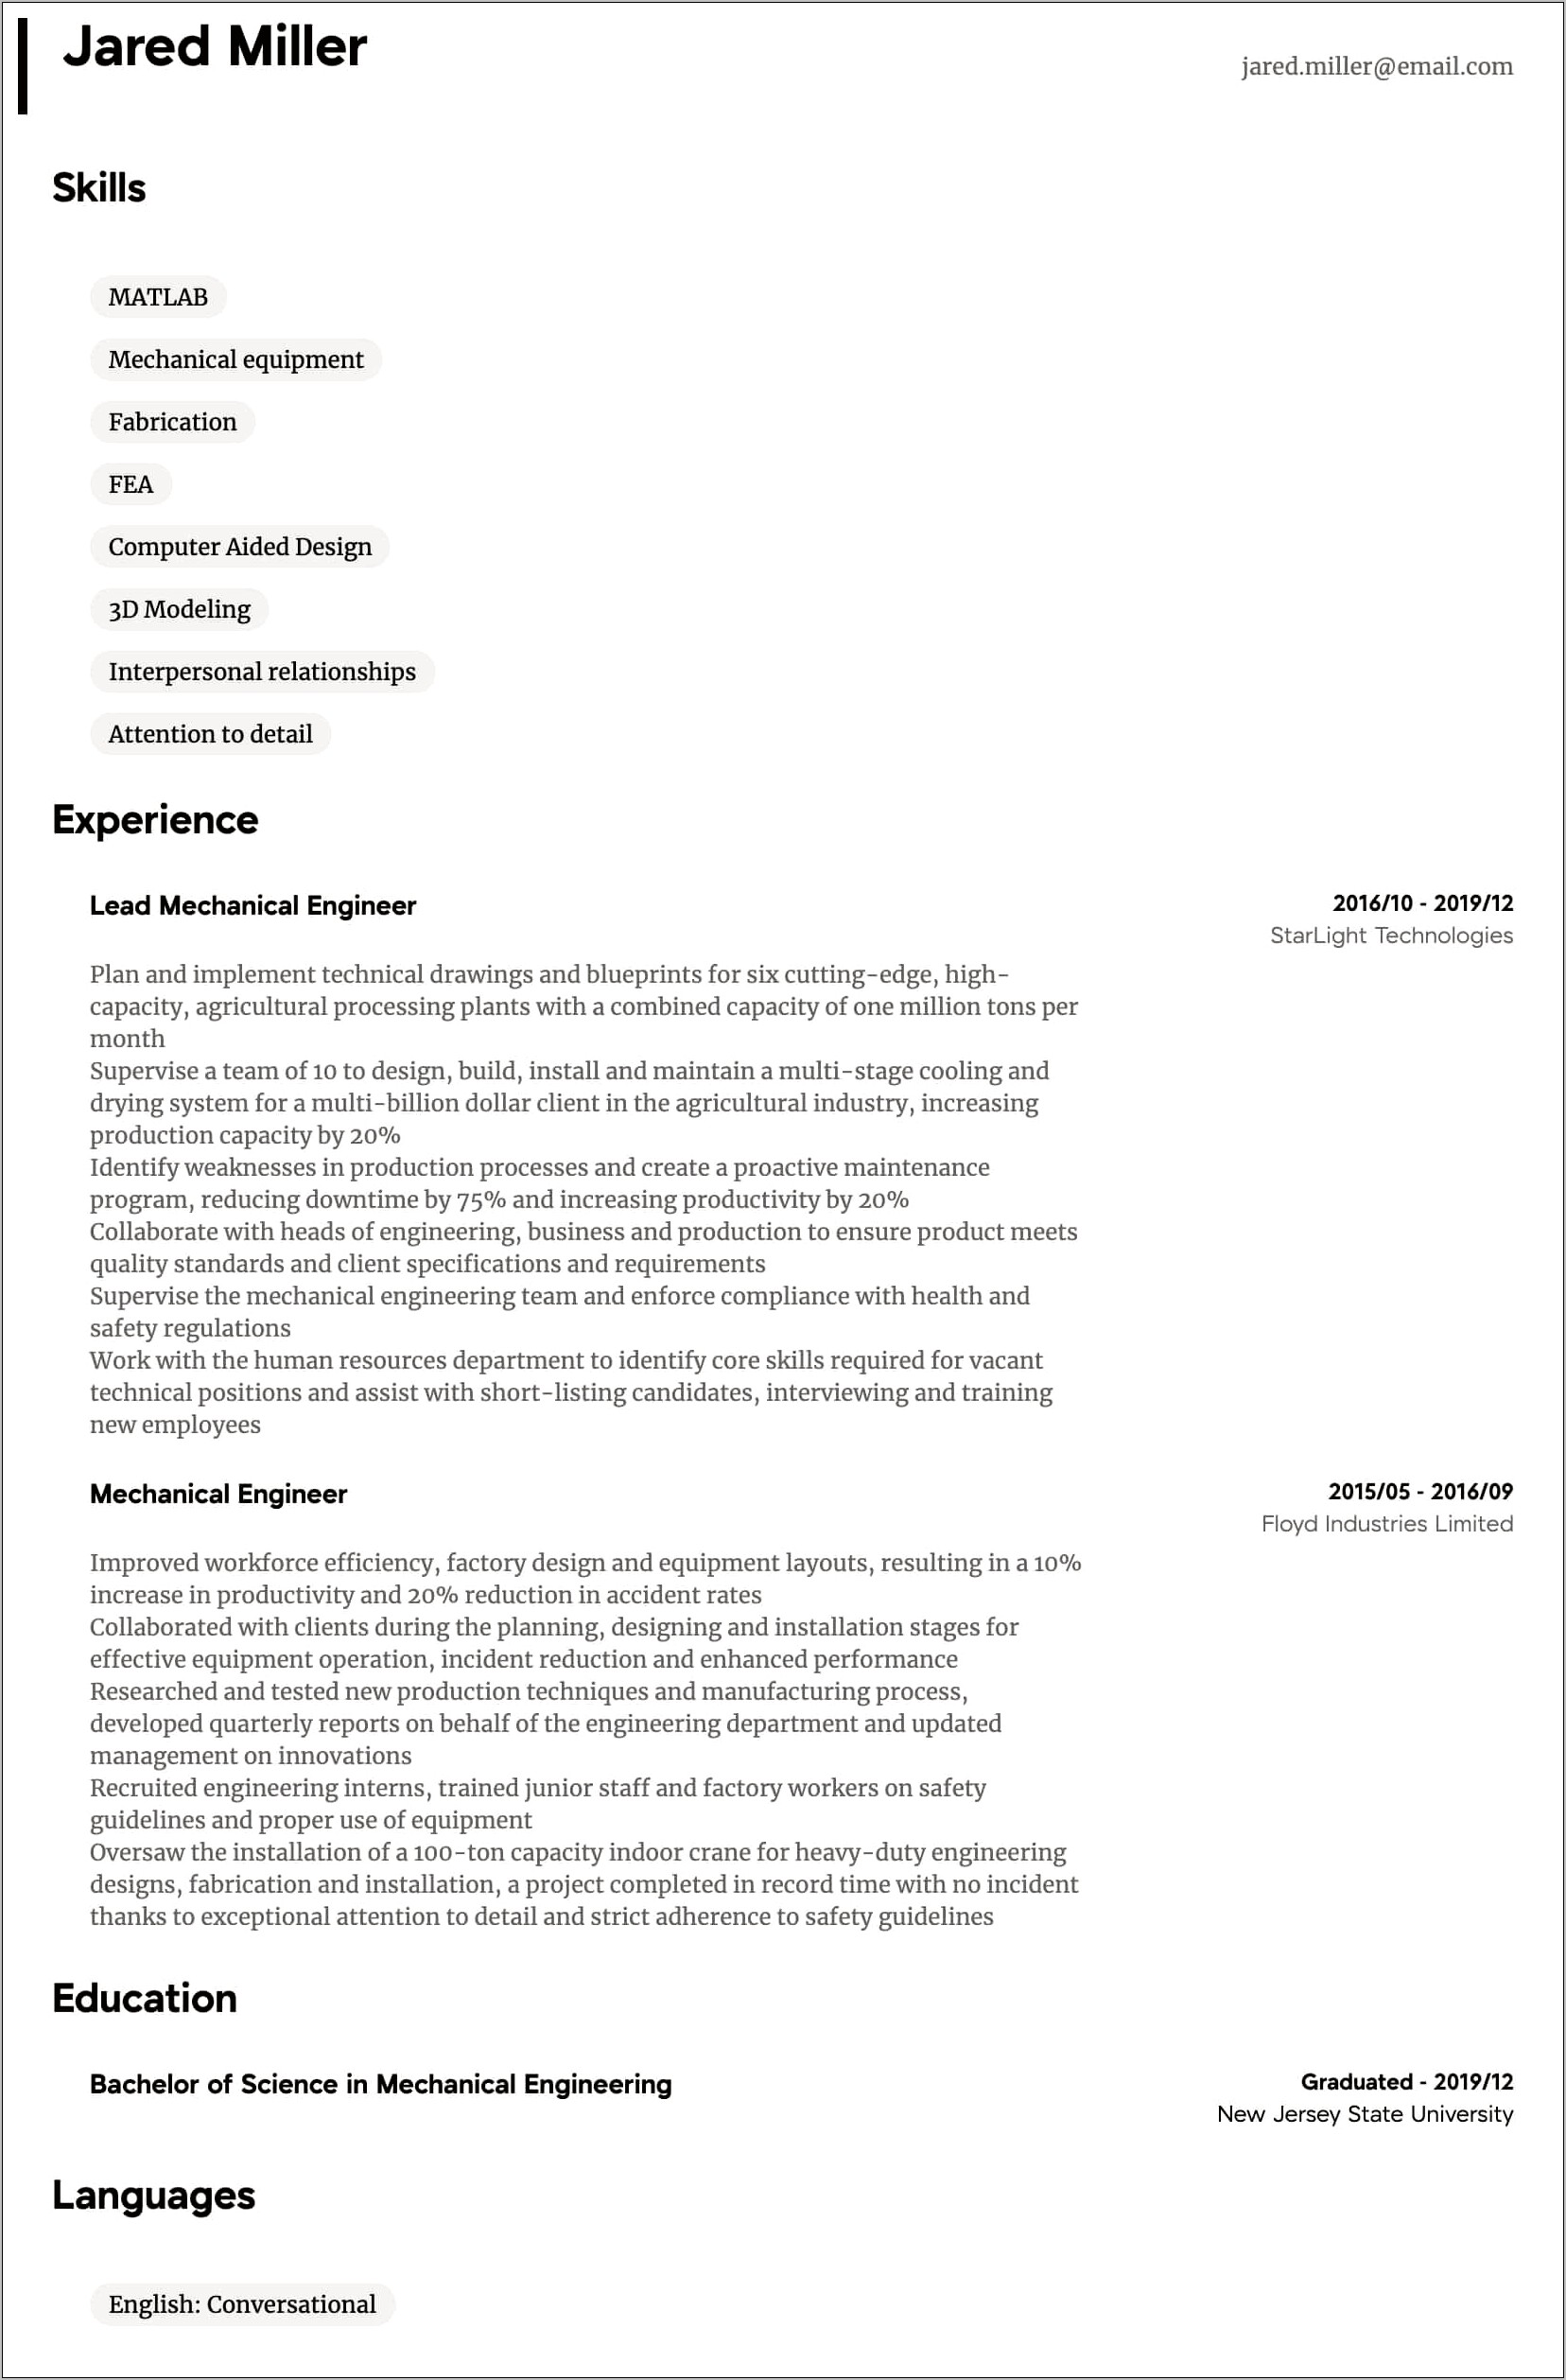 8 Year Experience Resume Format For Mechanical Engineer